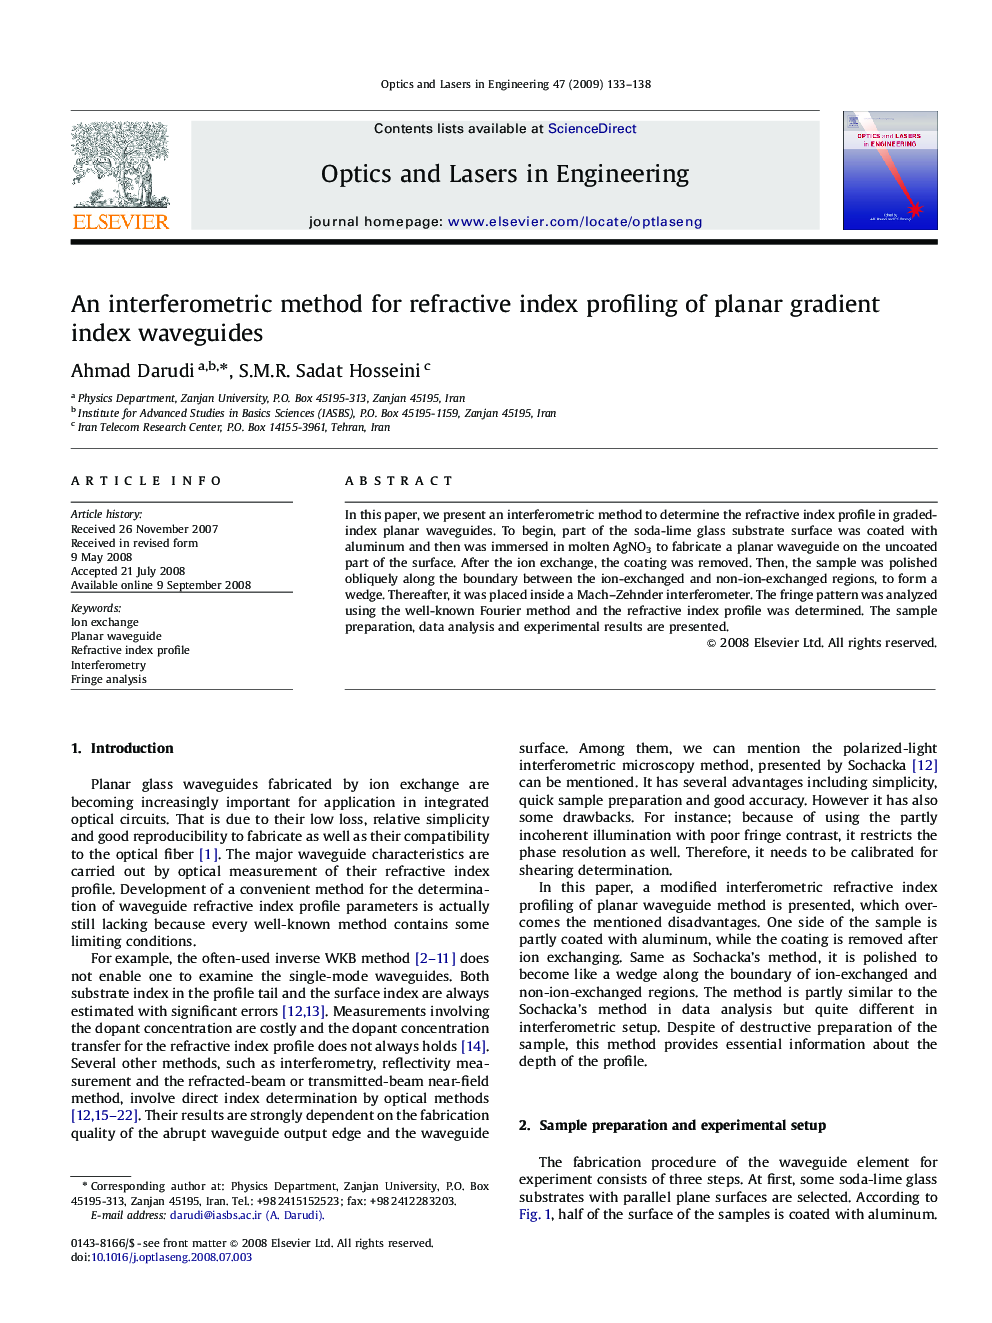 An interferometric method for refractive index profiling of planar gradient index waveguides